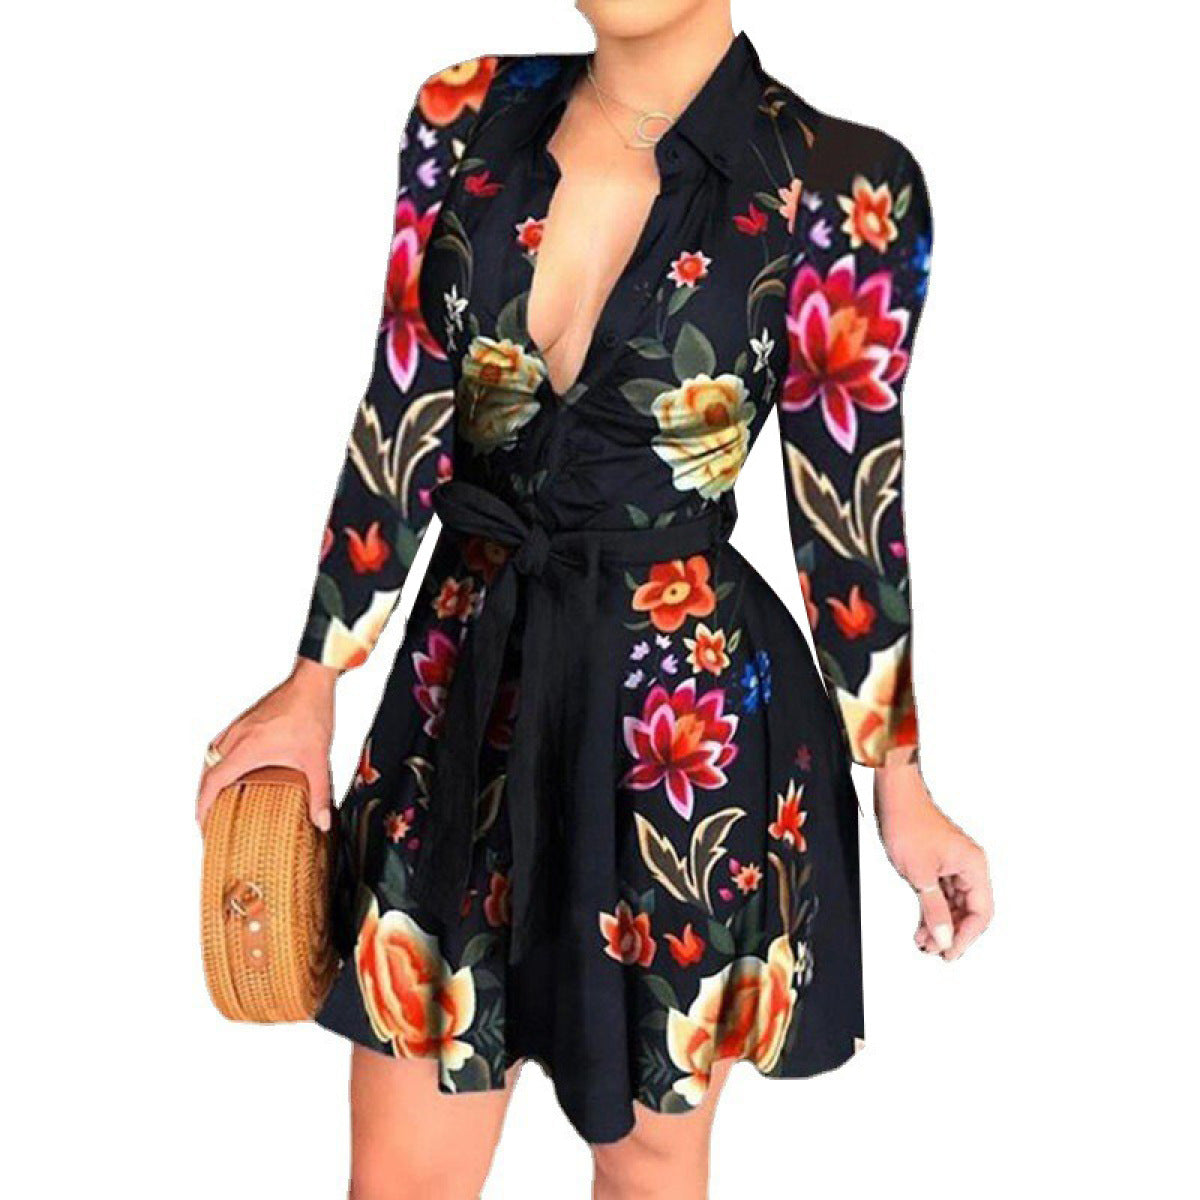 Floral Print Collared Single-Breasted Long-Sleeved Mini Dresses